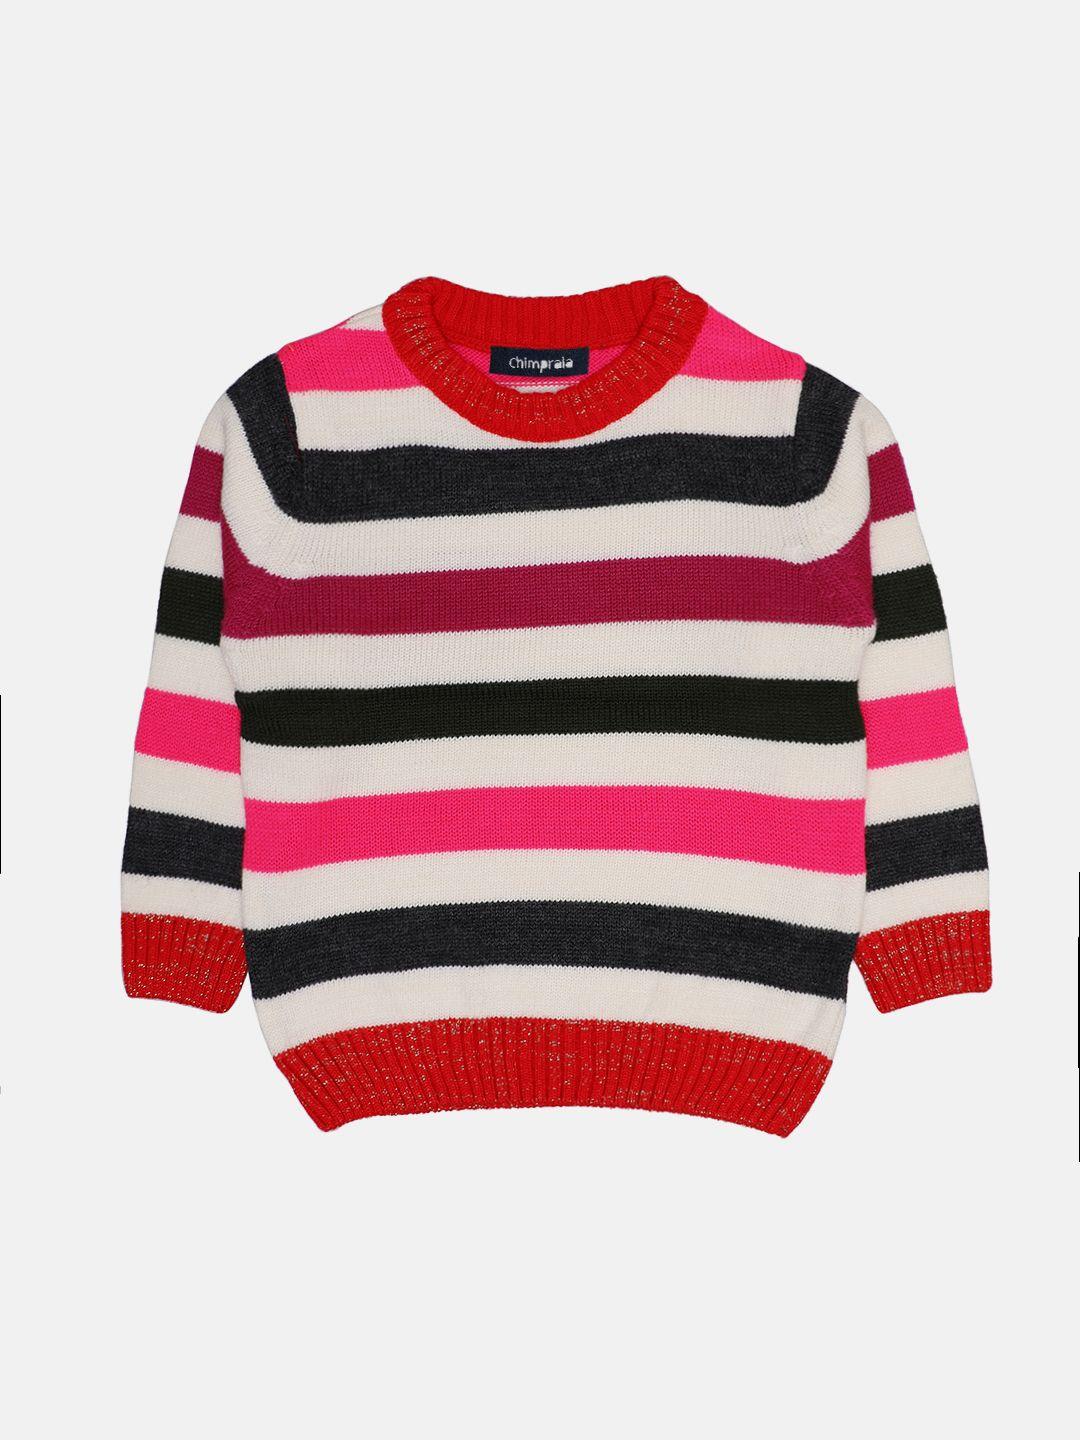 chimprala boys red & white striped woolen pullover